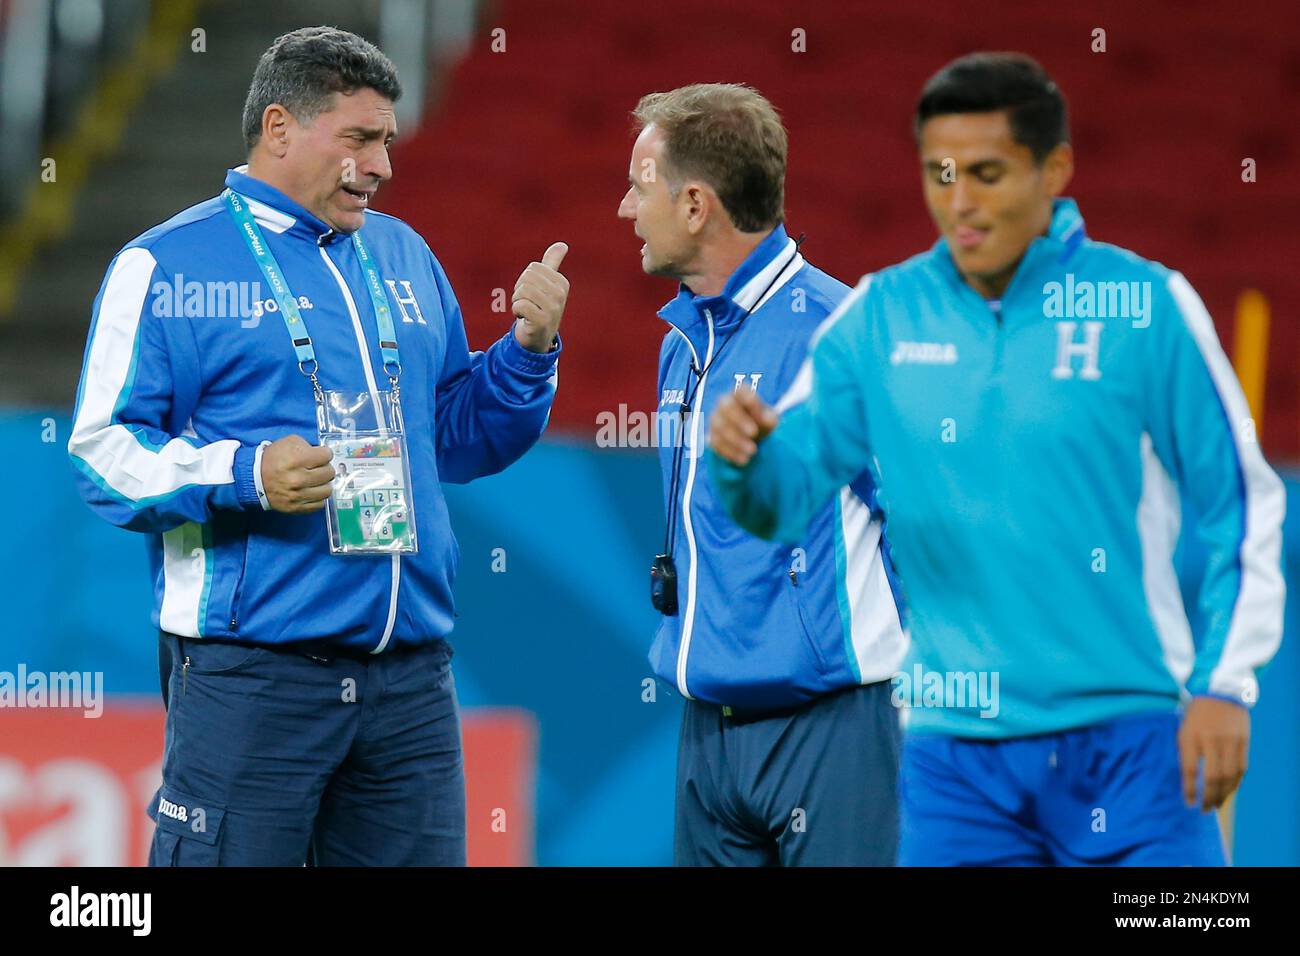 Luis Fernando Suarez, head coach of Honduras' soccer team, left, talks with an assistant during a training session at the Estadio Beira-Rio in Porto Alegre, Brazil, Saturday, June 14, 2014. Honduras will play in E group of the Brazil 2014 World Cup. (AP Photo/David Vincent) Stock Photo